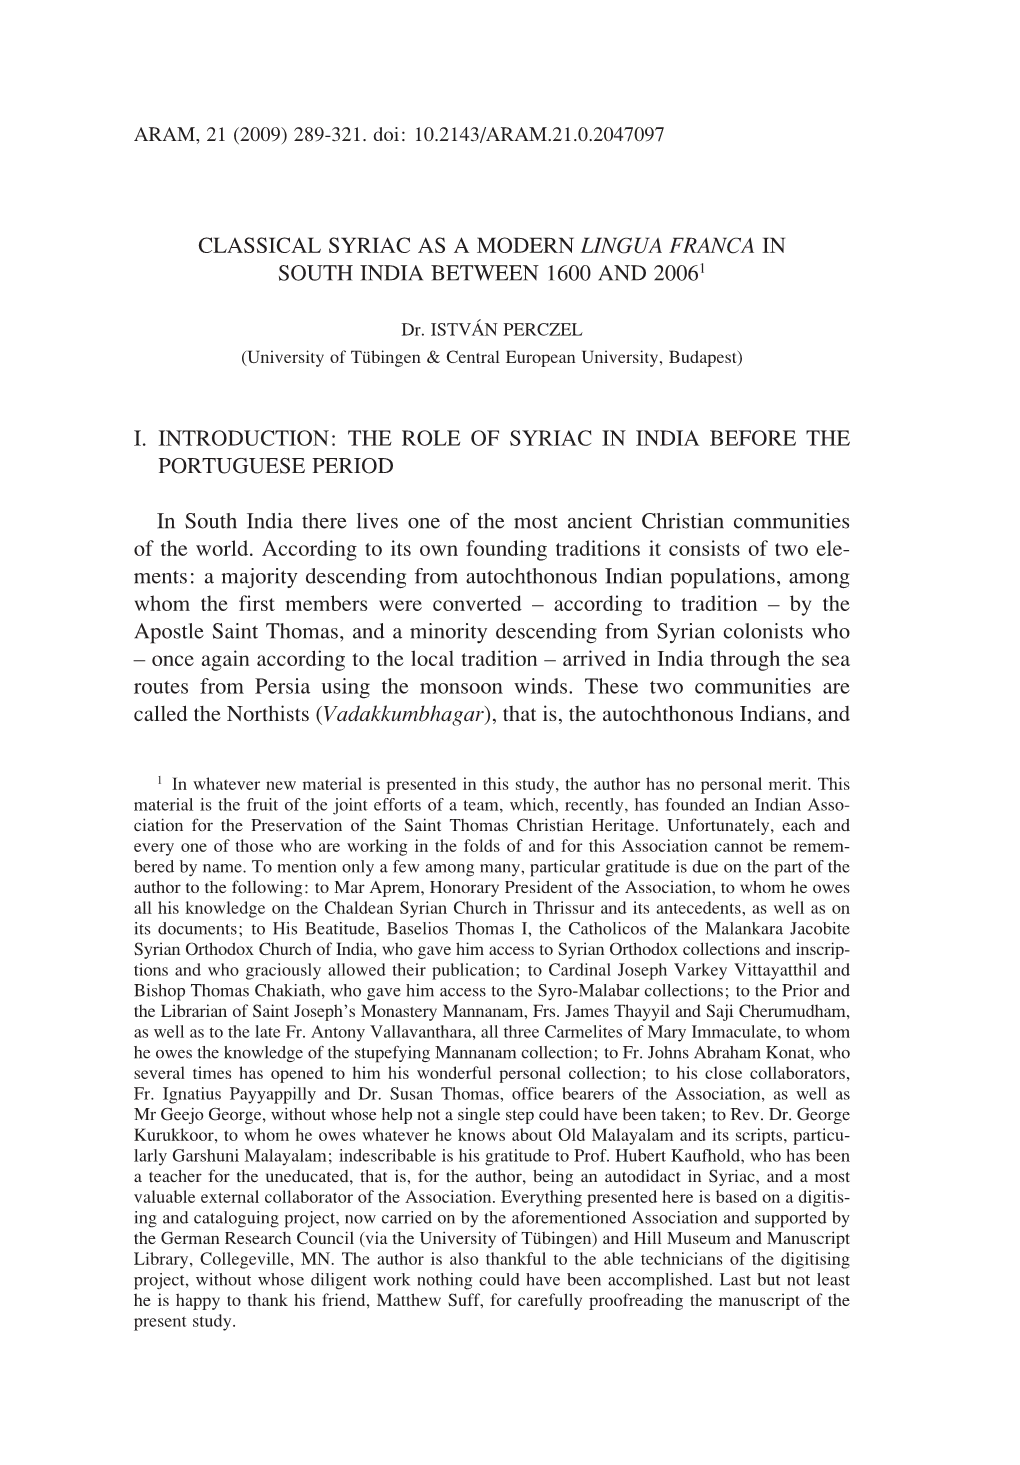 The Role of Syriac in India Before the Portuguese Period